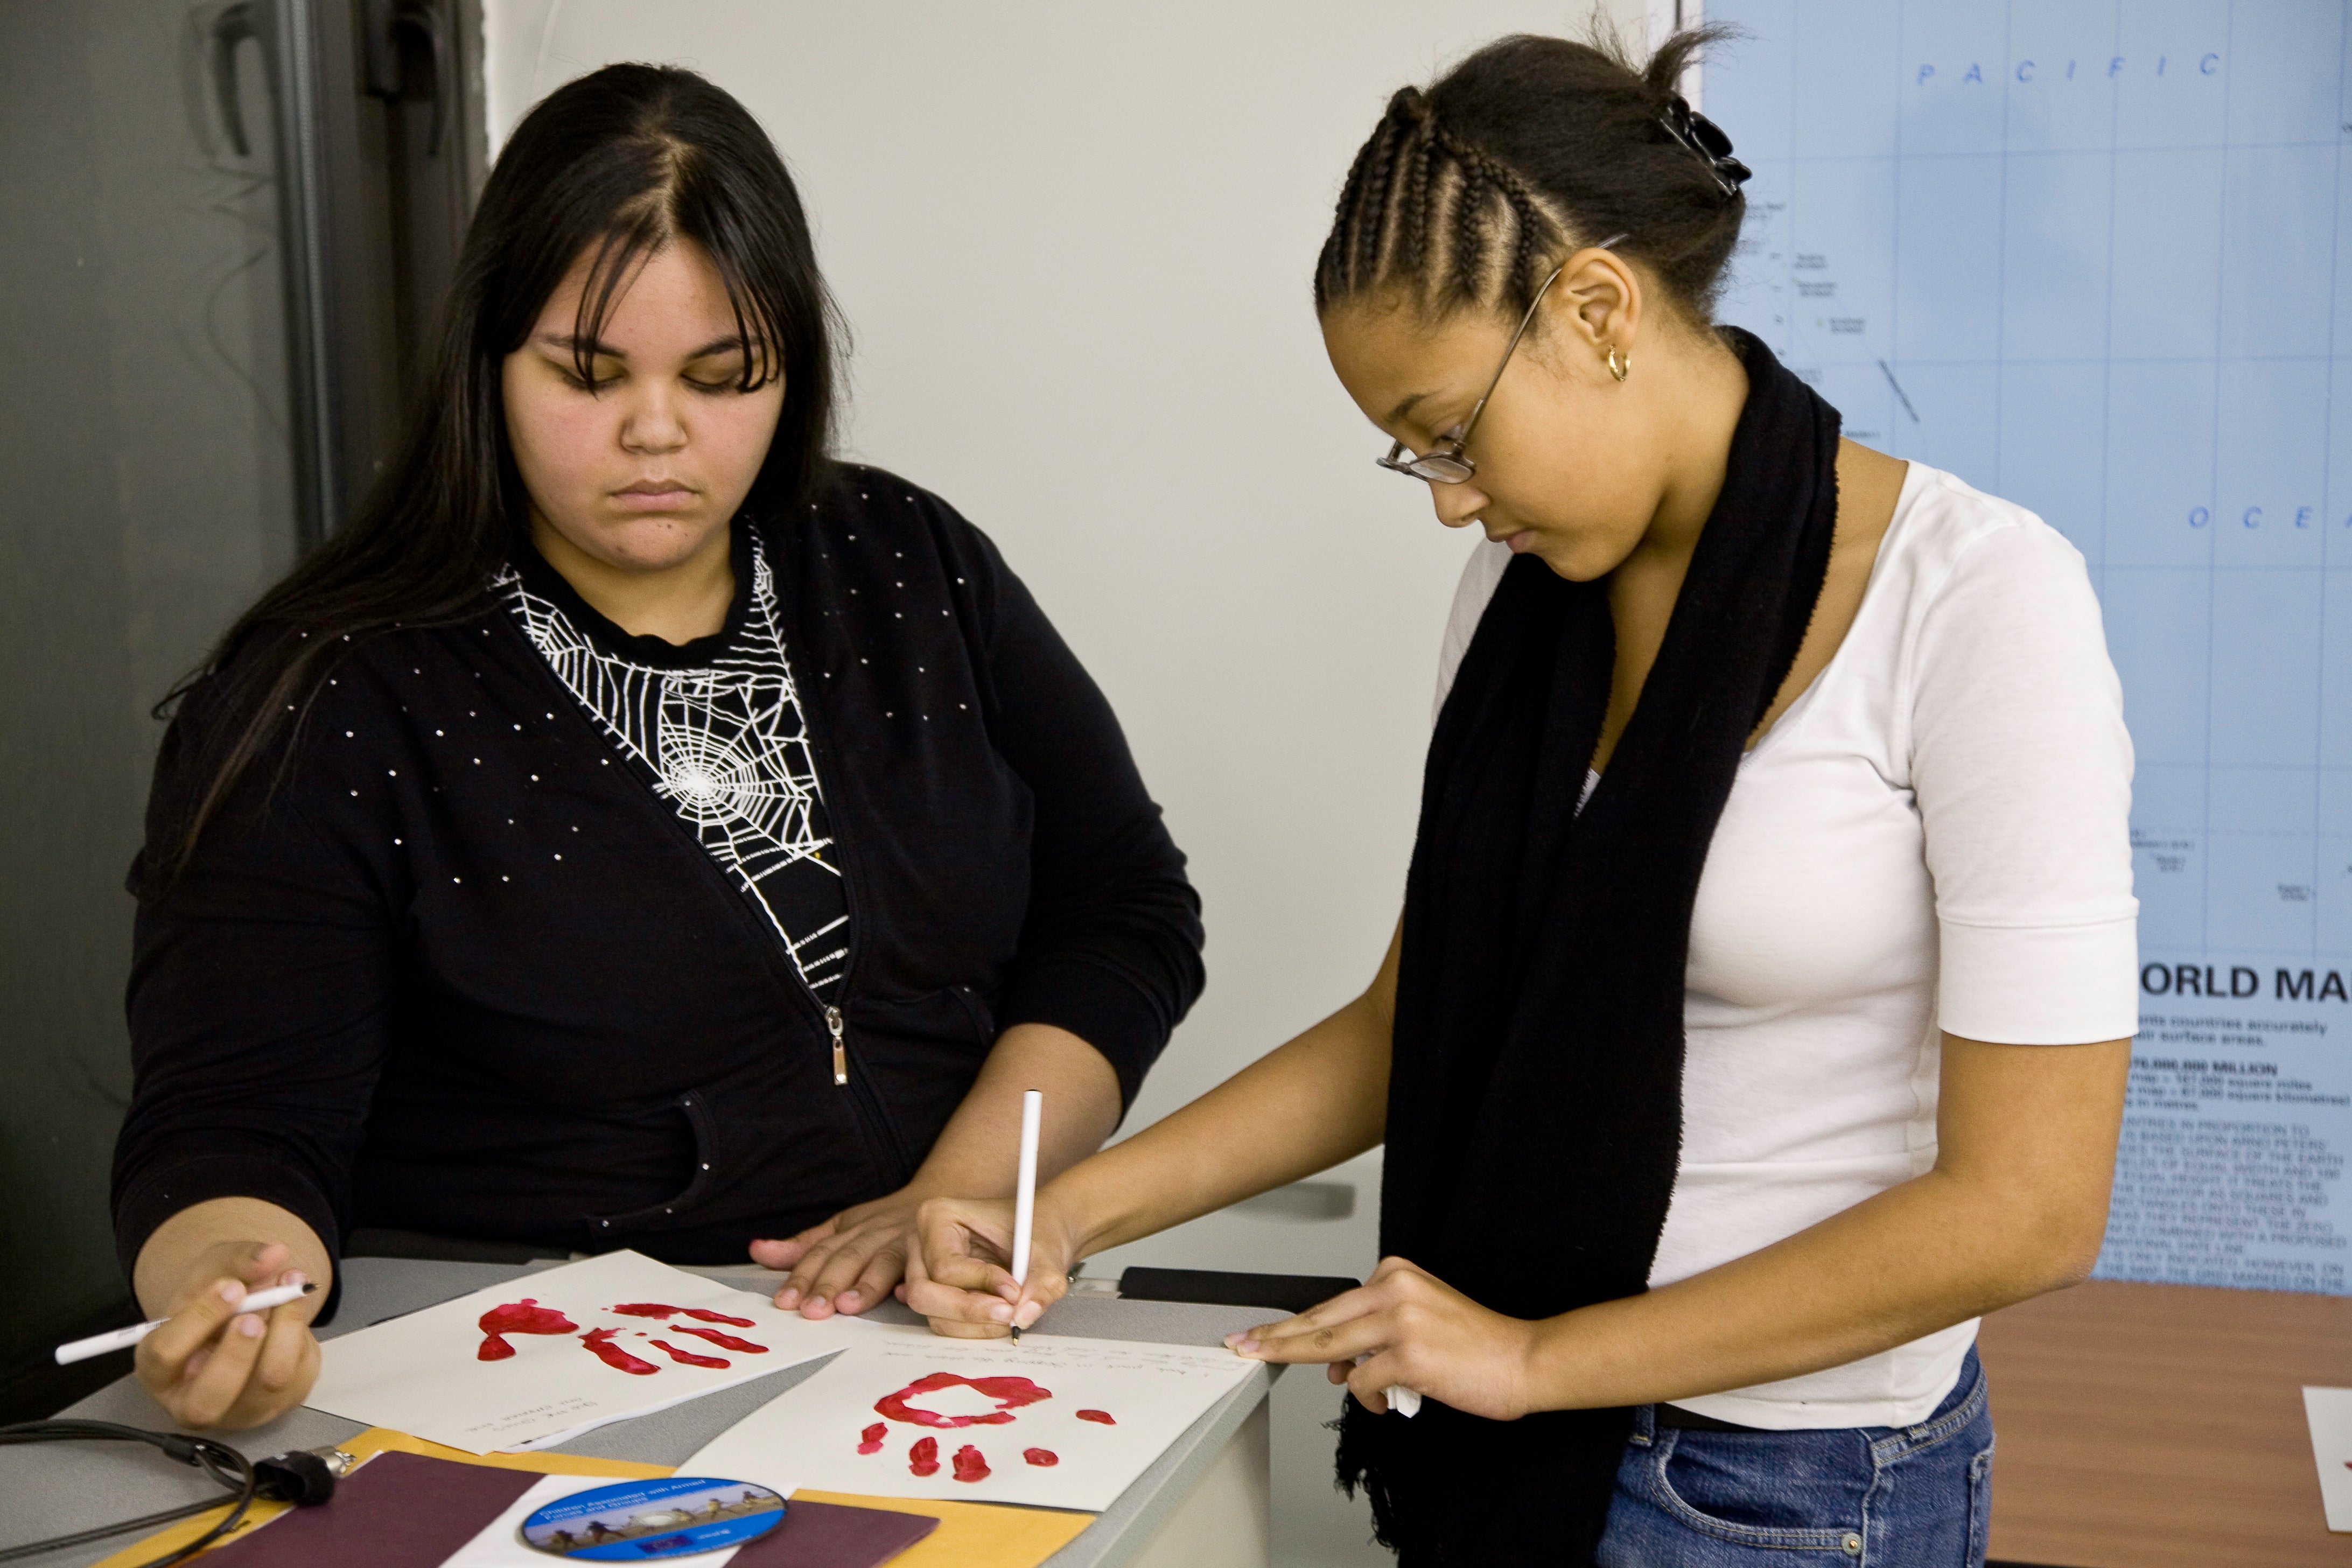 High school students work on an art project together.